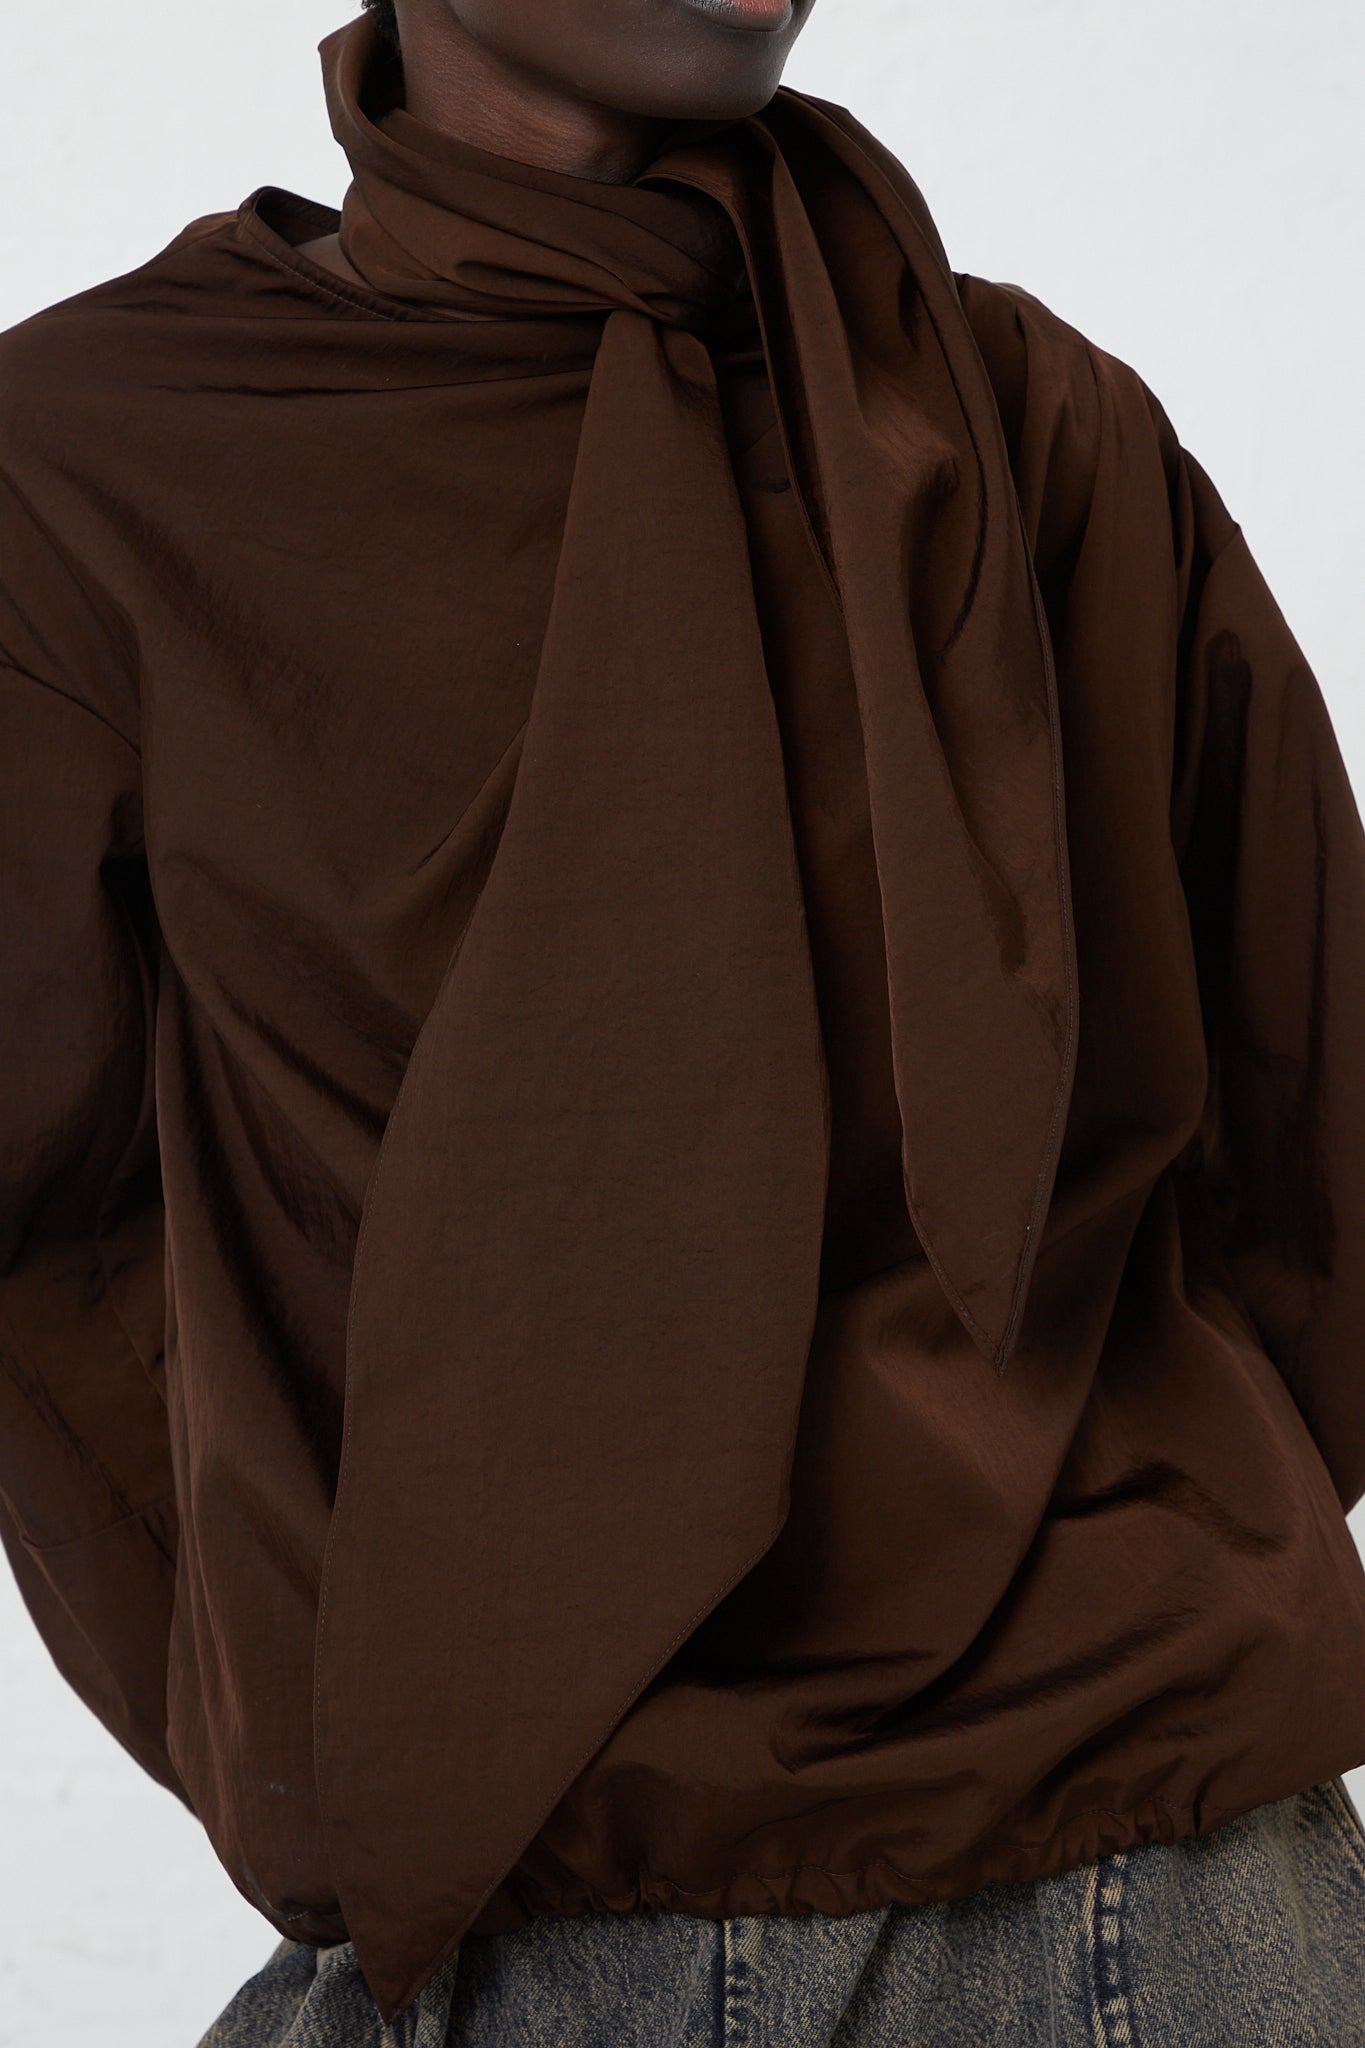 A woman wearing a brown shirt and jeans, sporting the Veronique Leroy Zipped on Sleeve Rain Blouse in Choco, made of taffeta nylon.